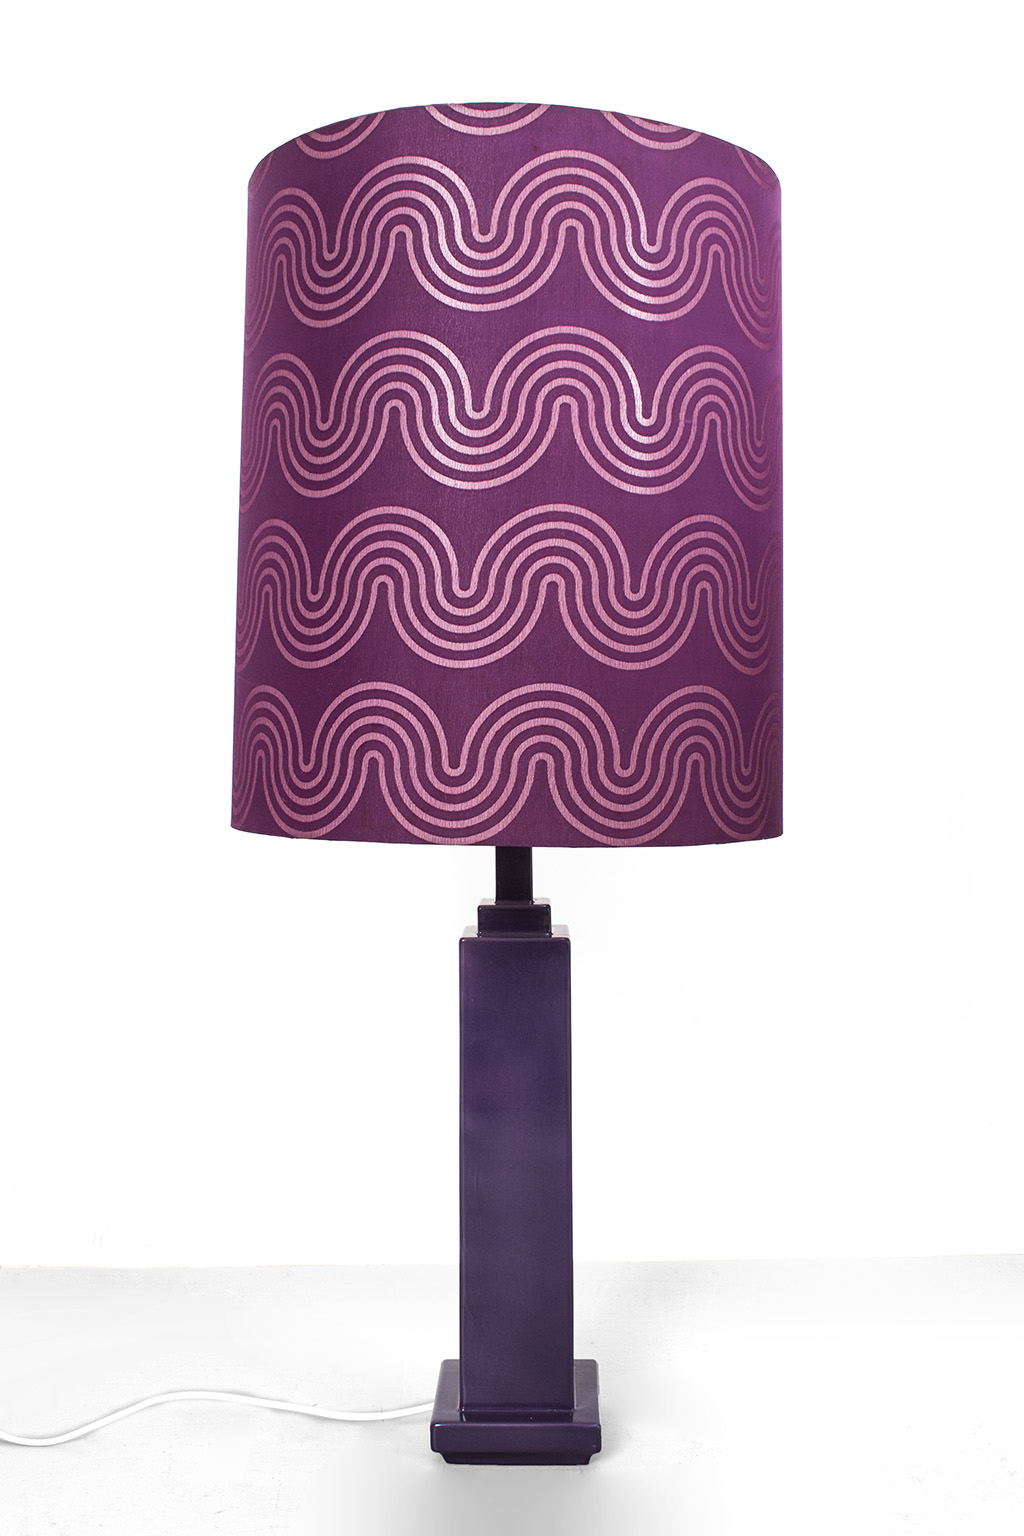 Funky purple table lamp from the 70s